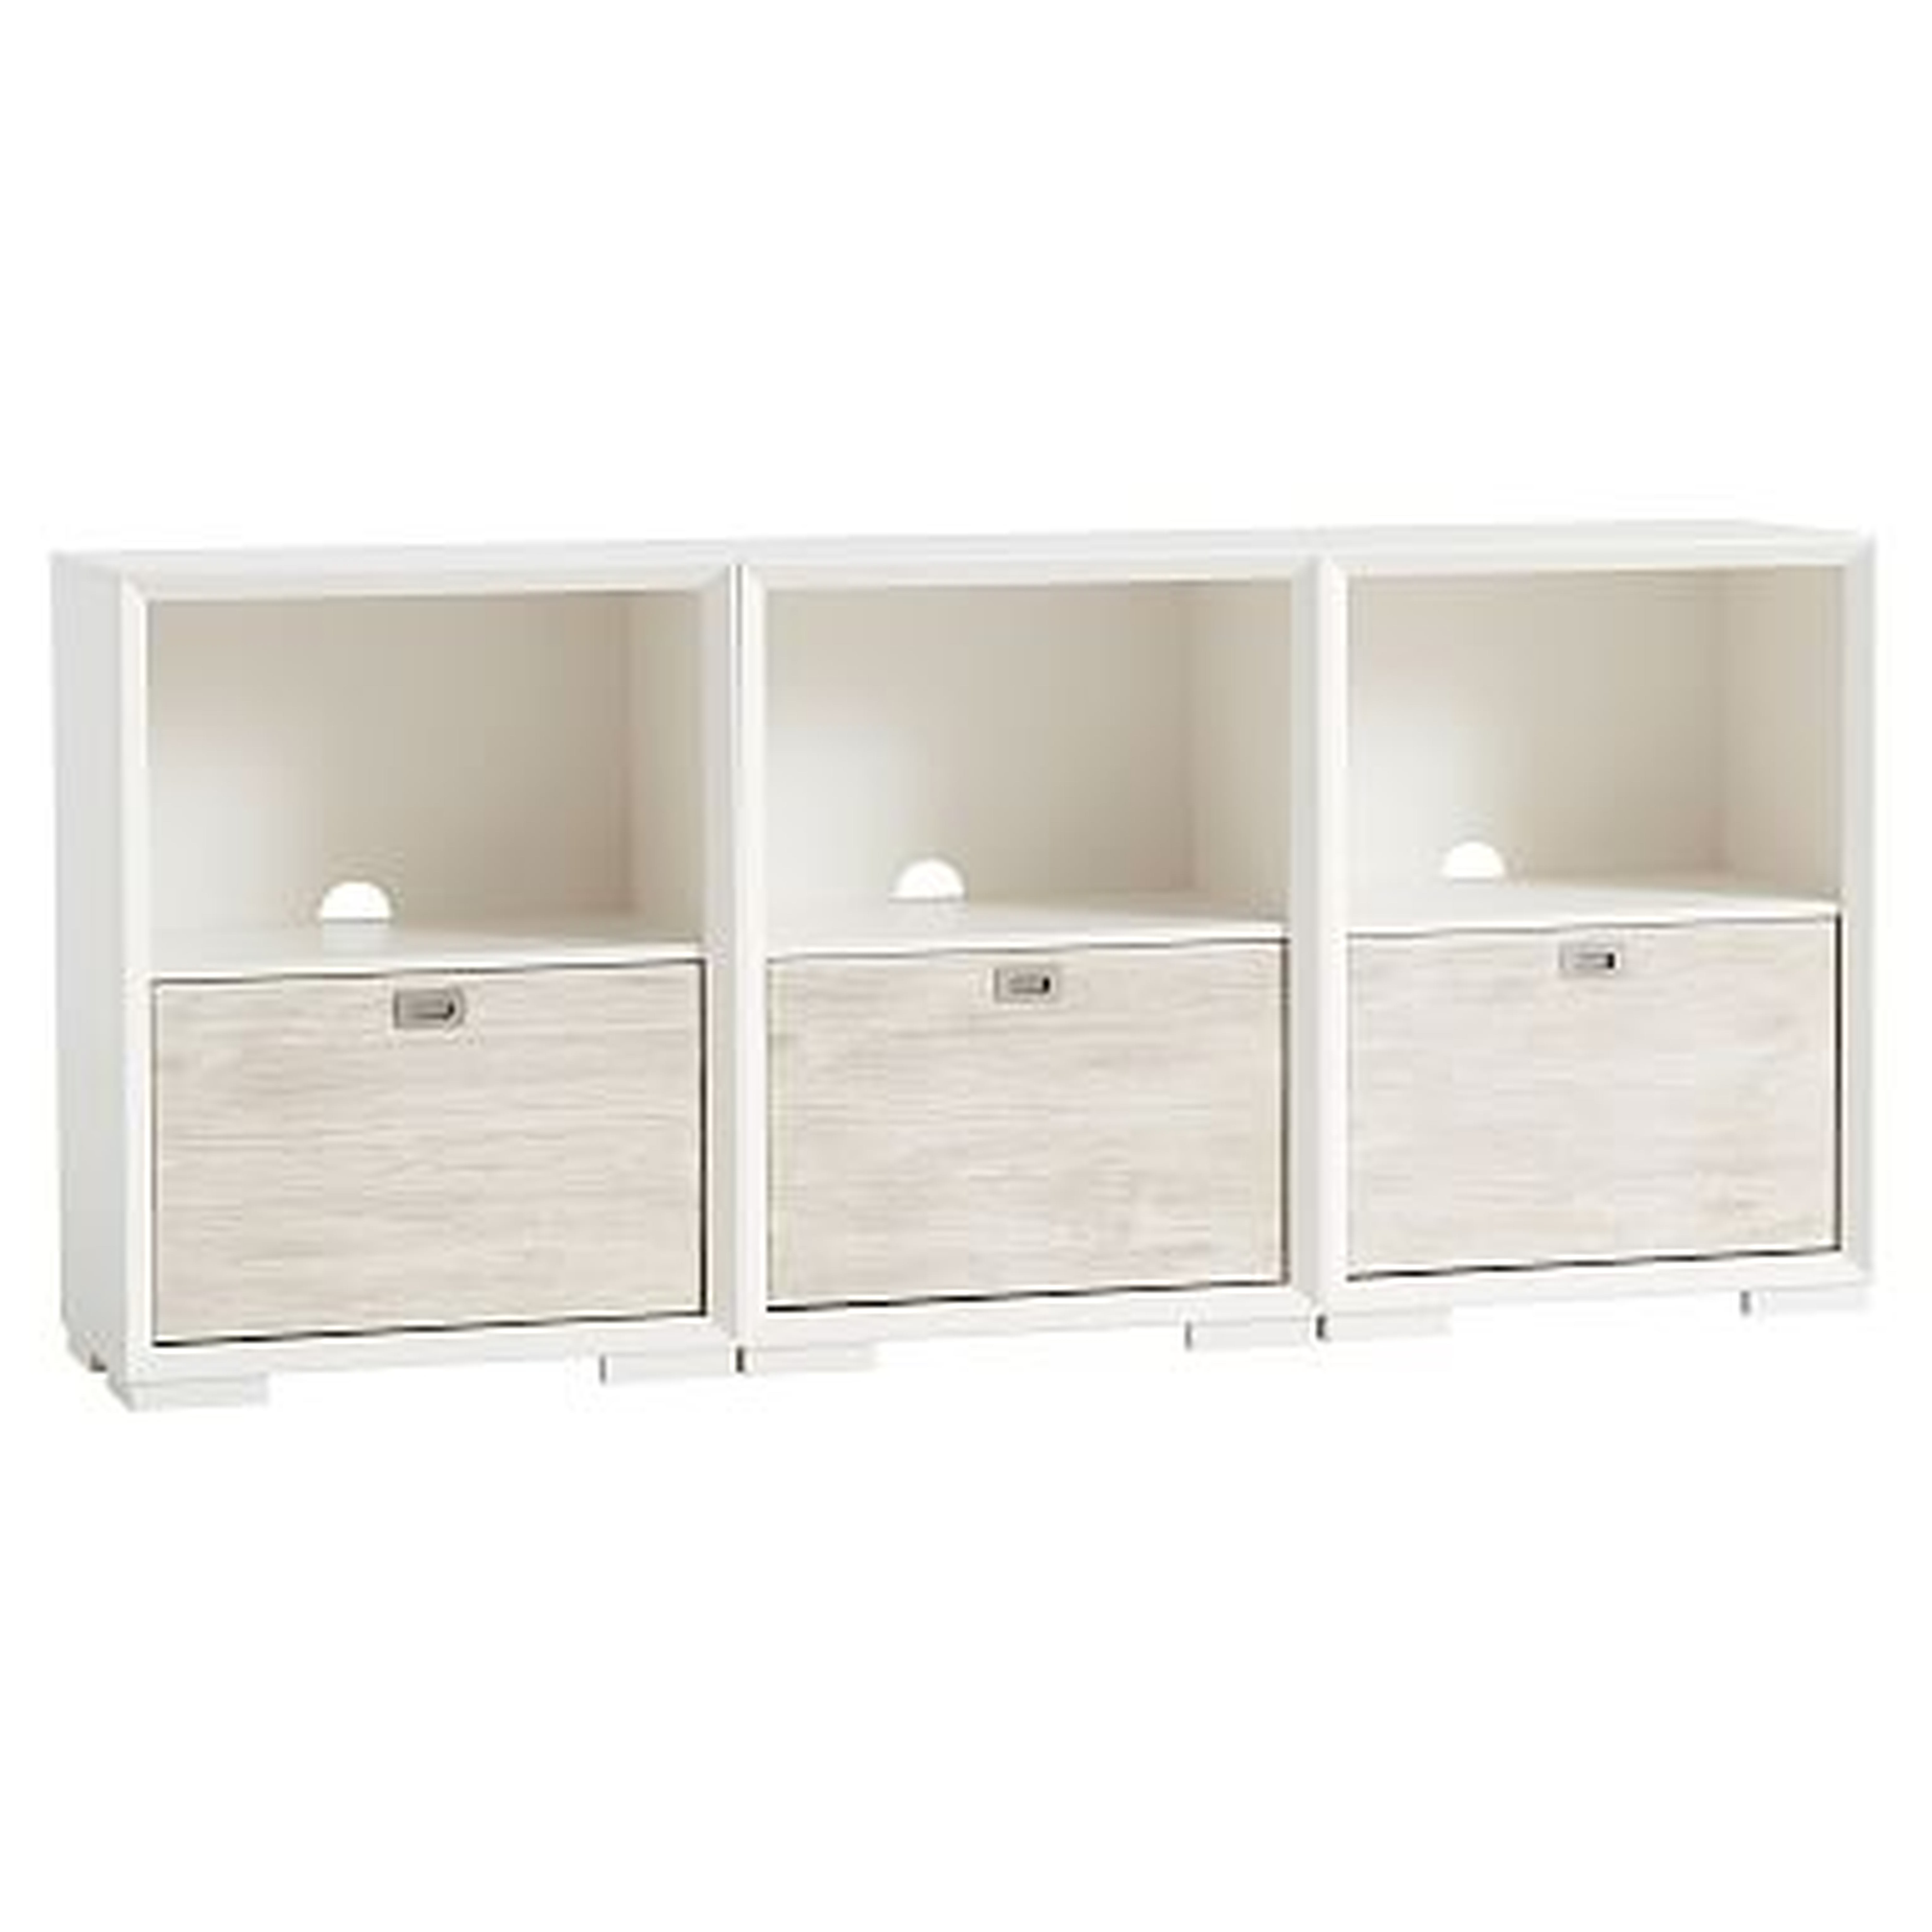 Callum Triple 1-Drawer Storage Cabinet with Feet Weathered White/Simply White - Pottery Barn Teen